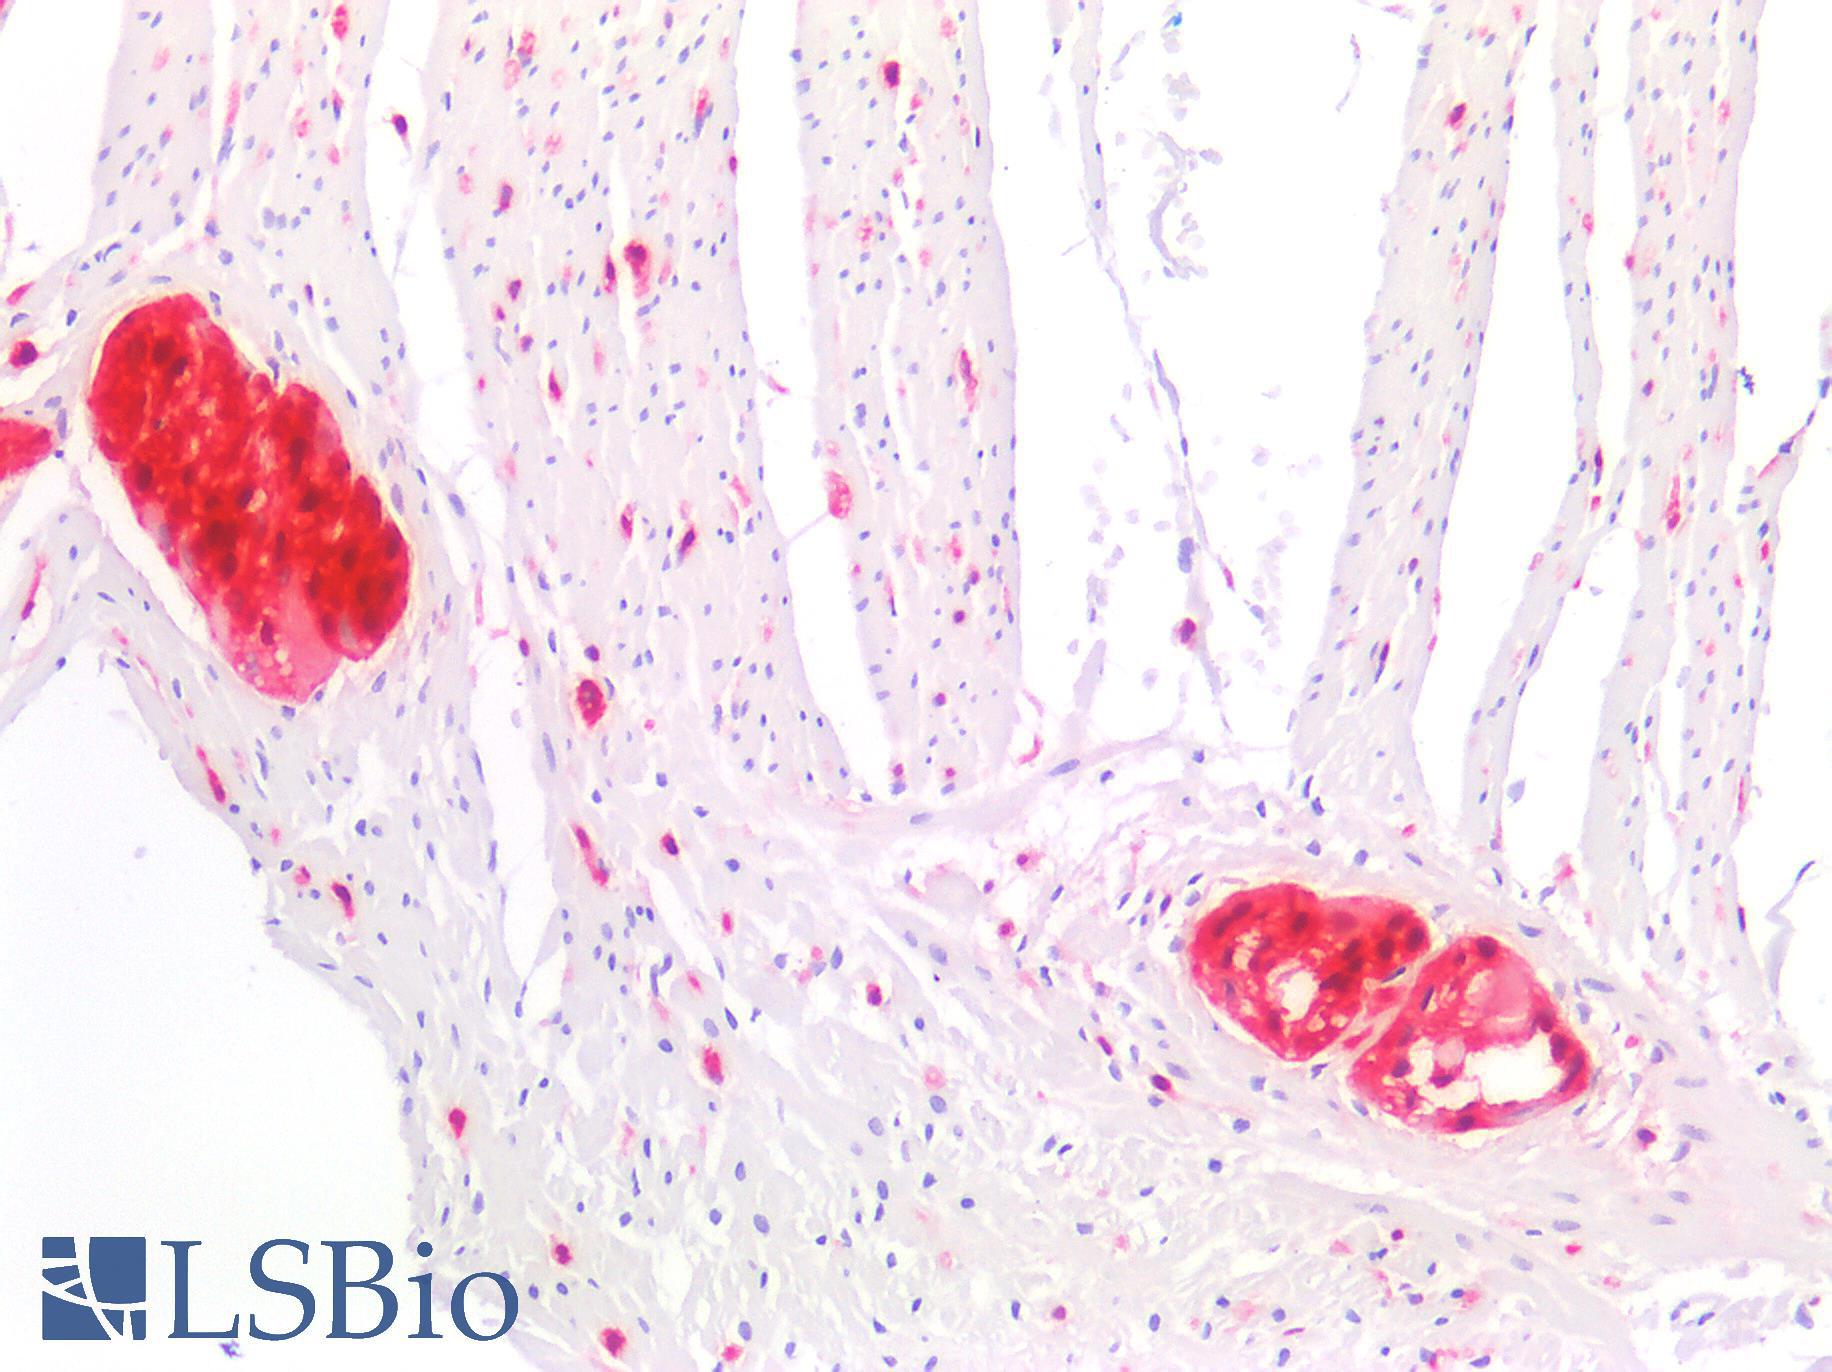 S100 Protein Antibody - Human Small Intestine: Formalin-Fixed, Paraffin-Embedded (FFPE)